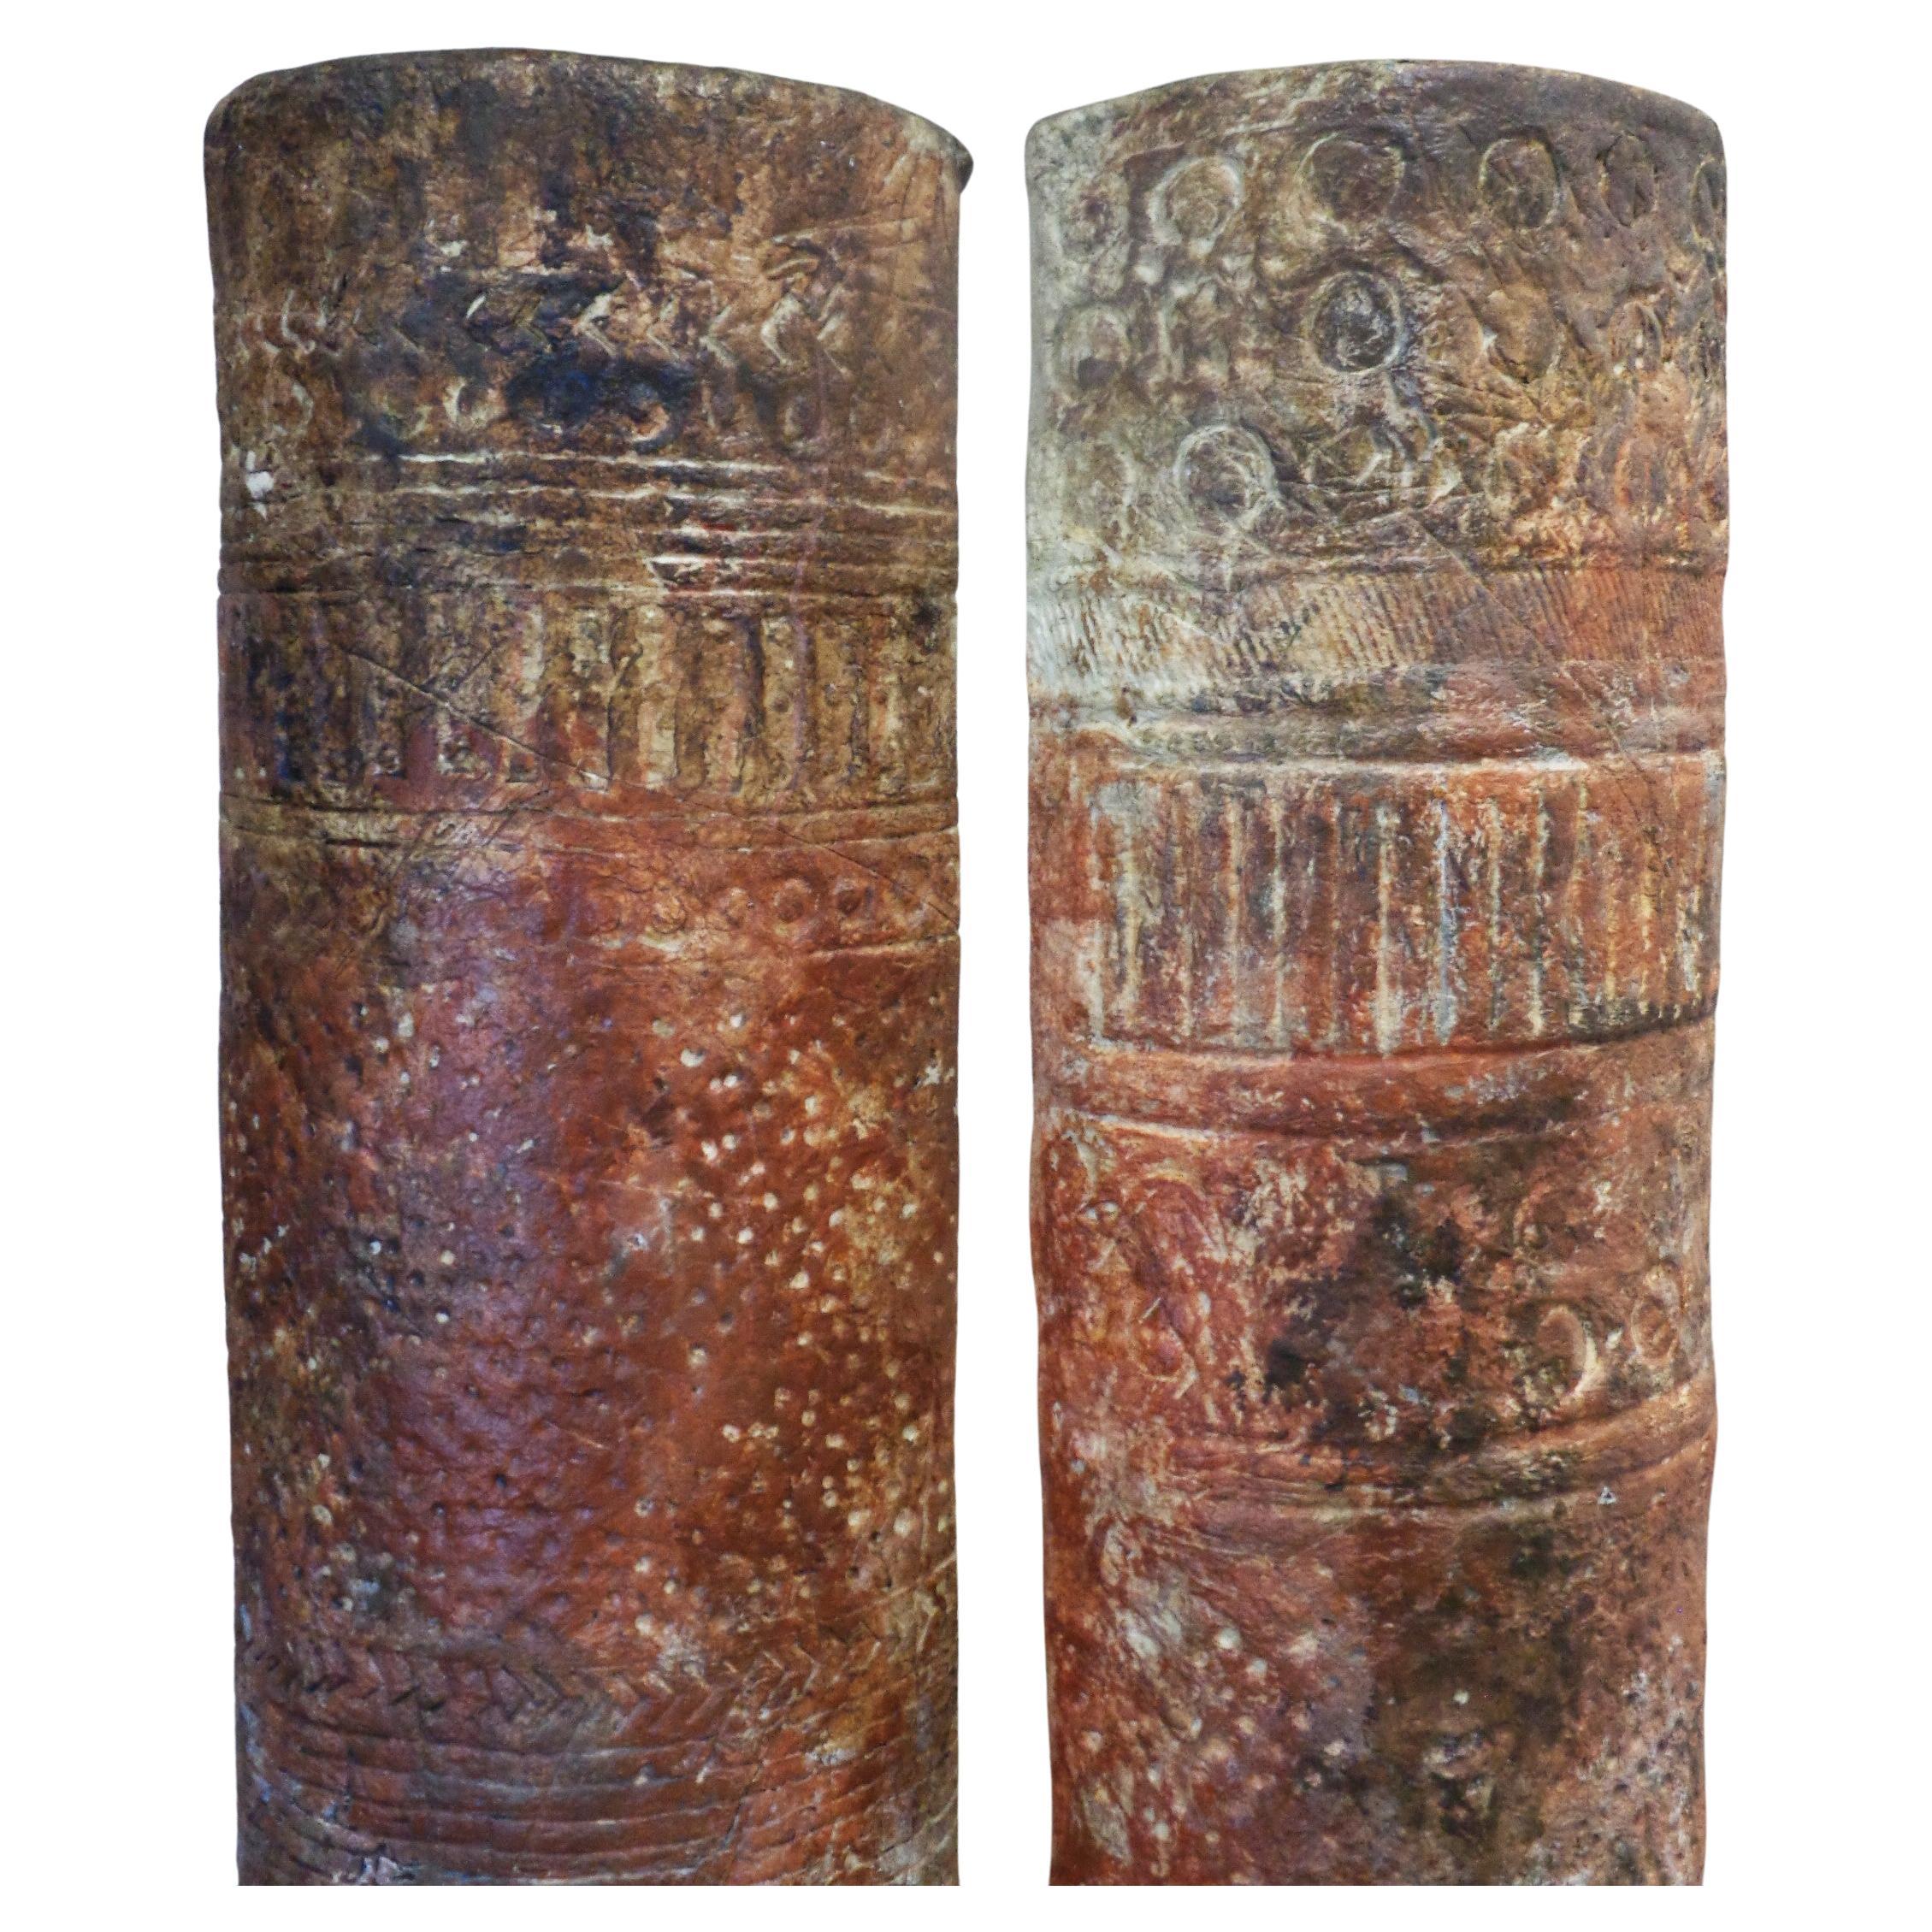 Pair of American Studio craft movement free standing half round pilaster columns w/ ancient burnished terracotta appearance and cryptic symbol decoration. Columns were constructed from a paper mache type emulsion of natural fibrous plant matter /